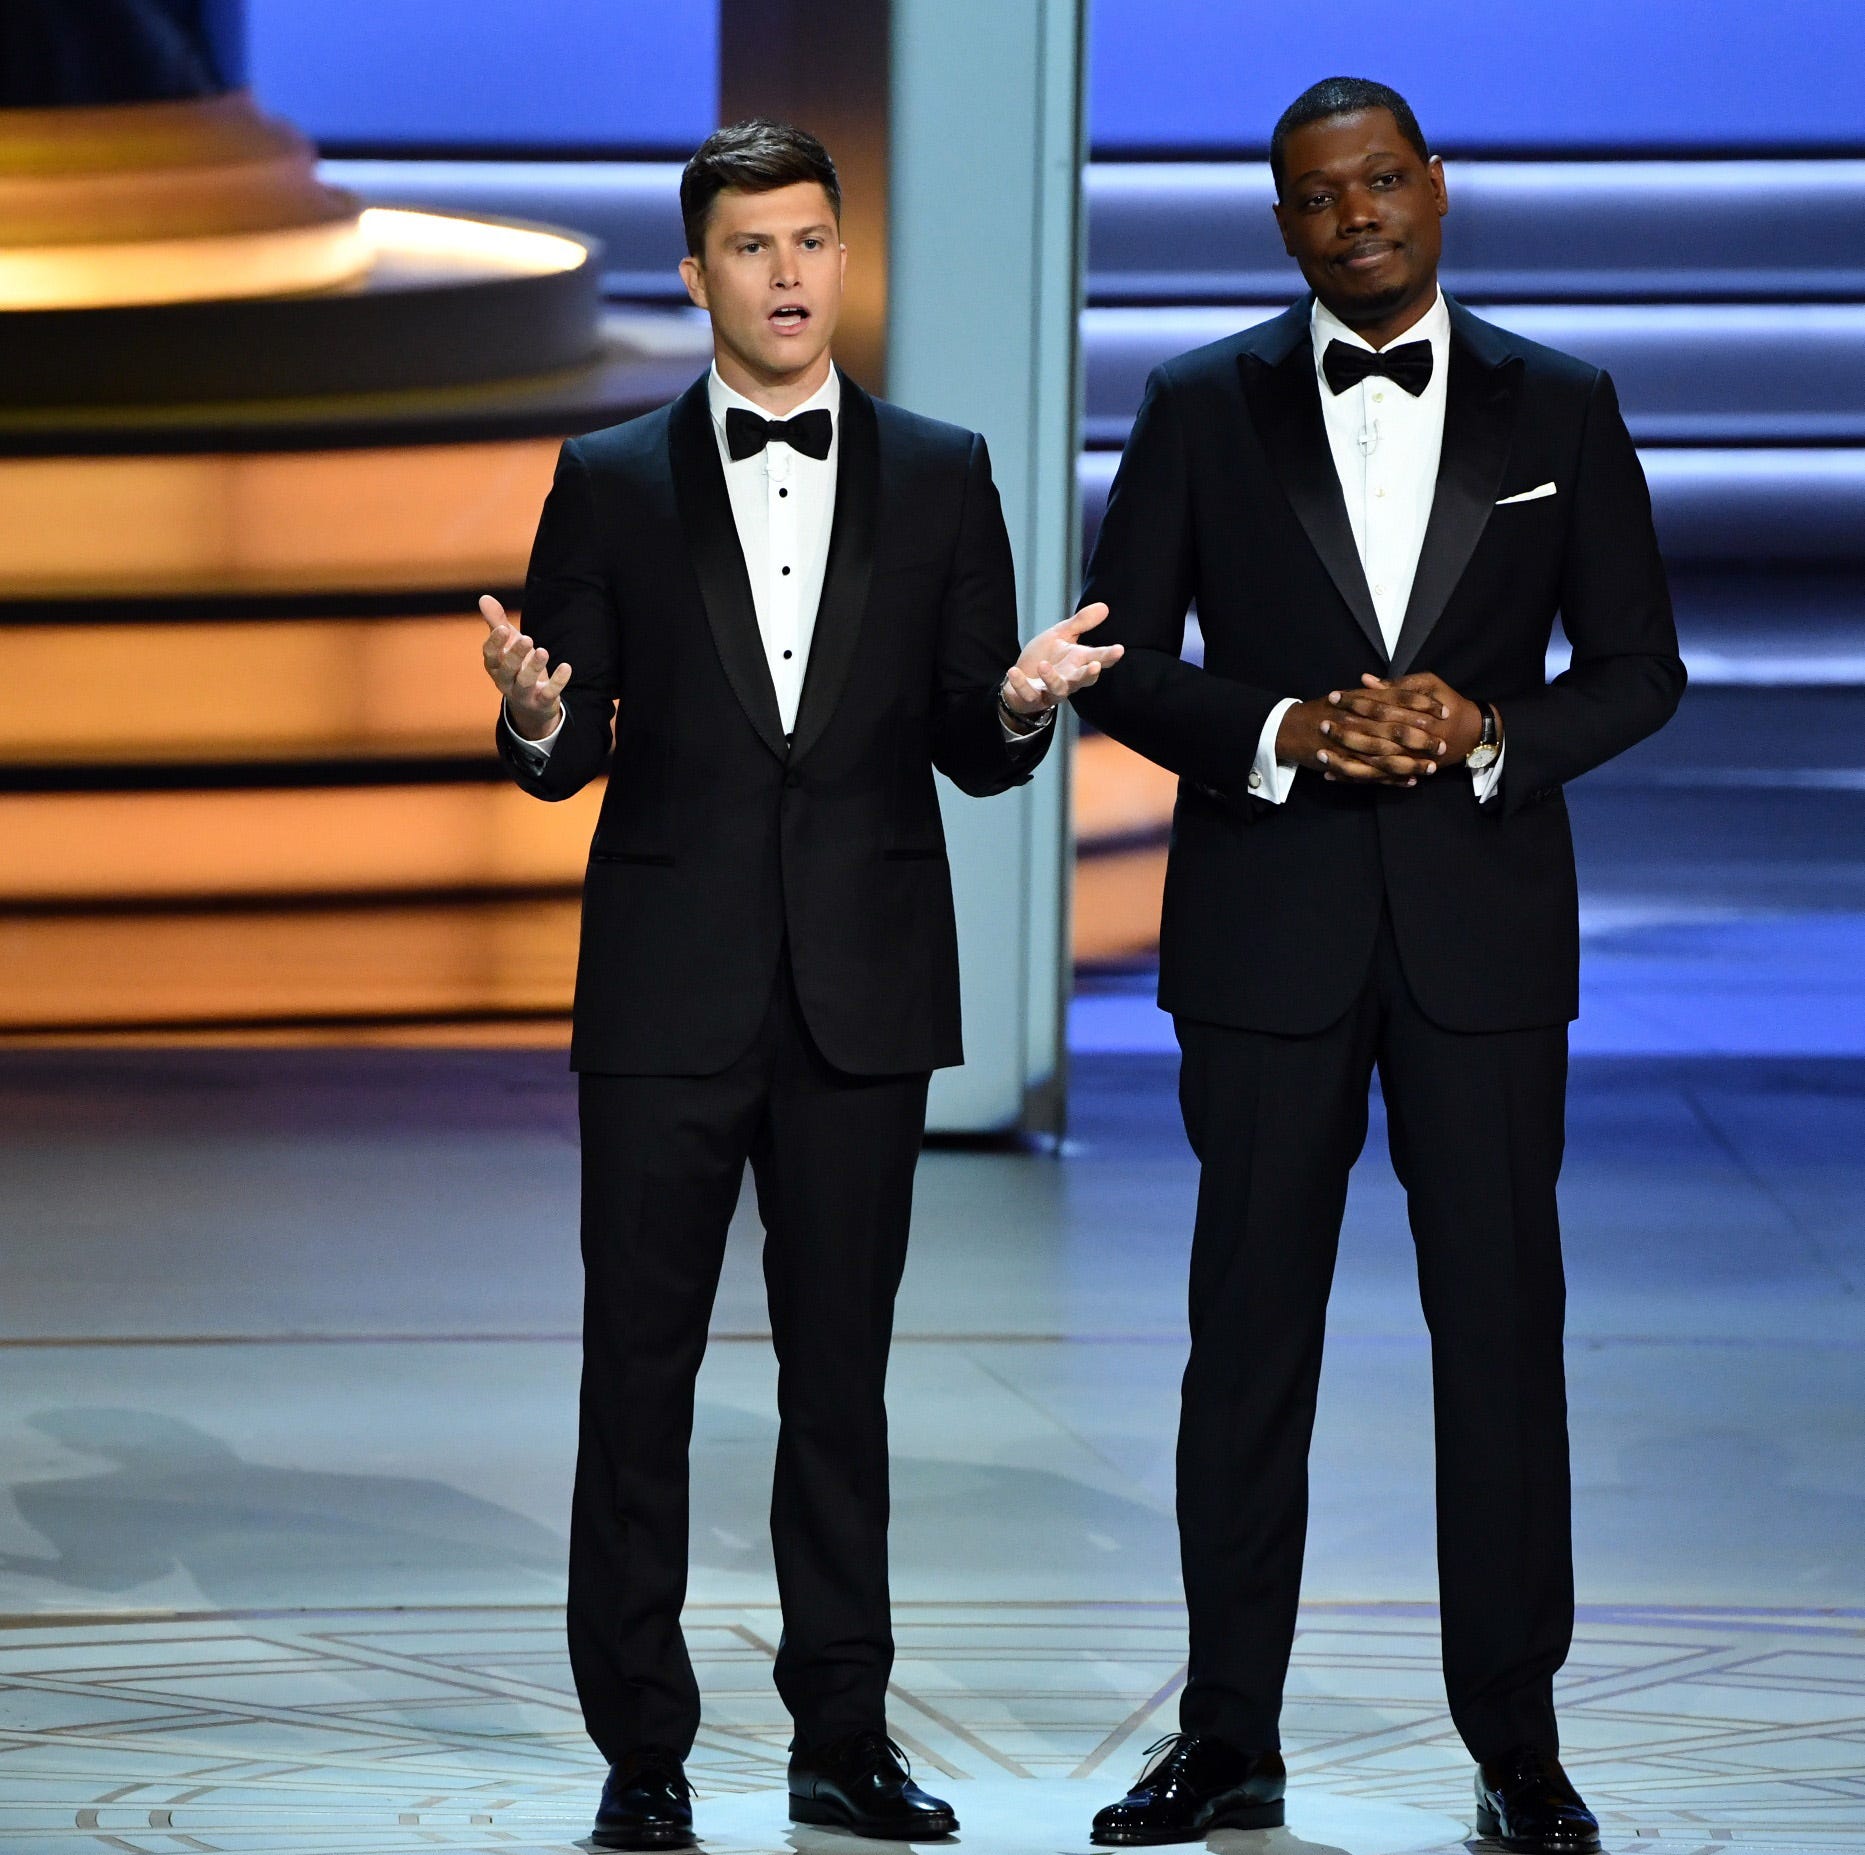 Colin Jost and Michael Che deliver the opening monologue during the 70th Emmy Awards.